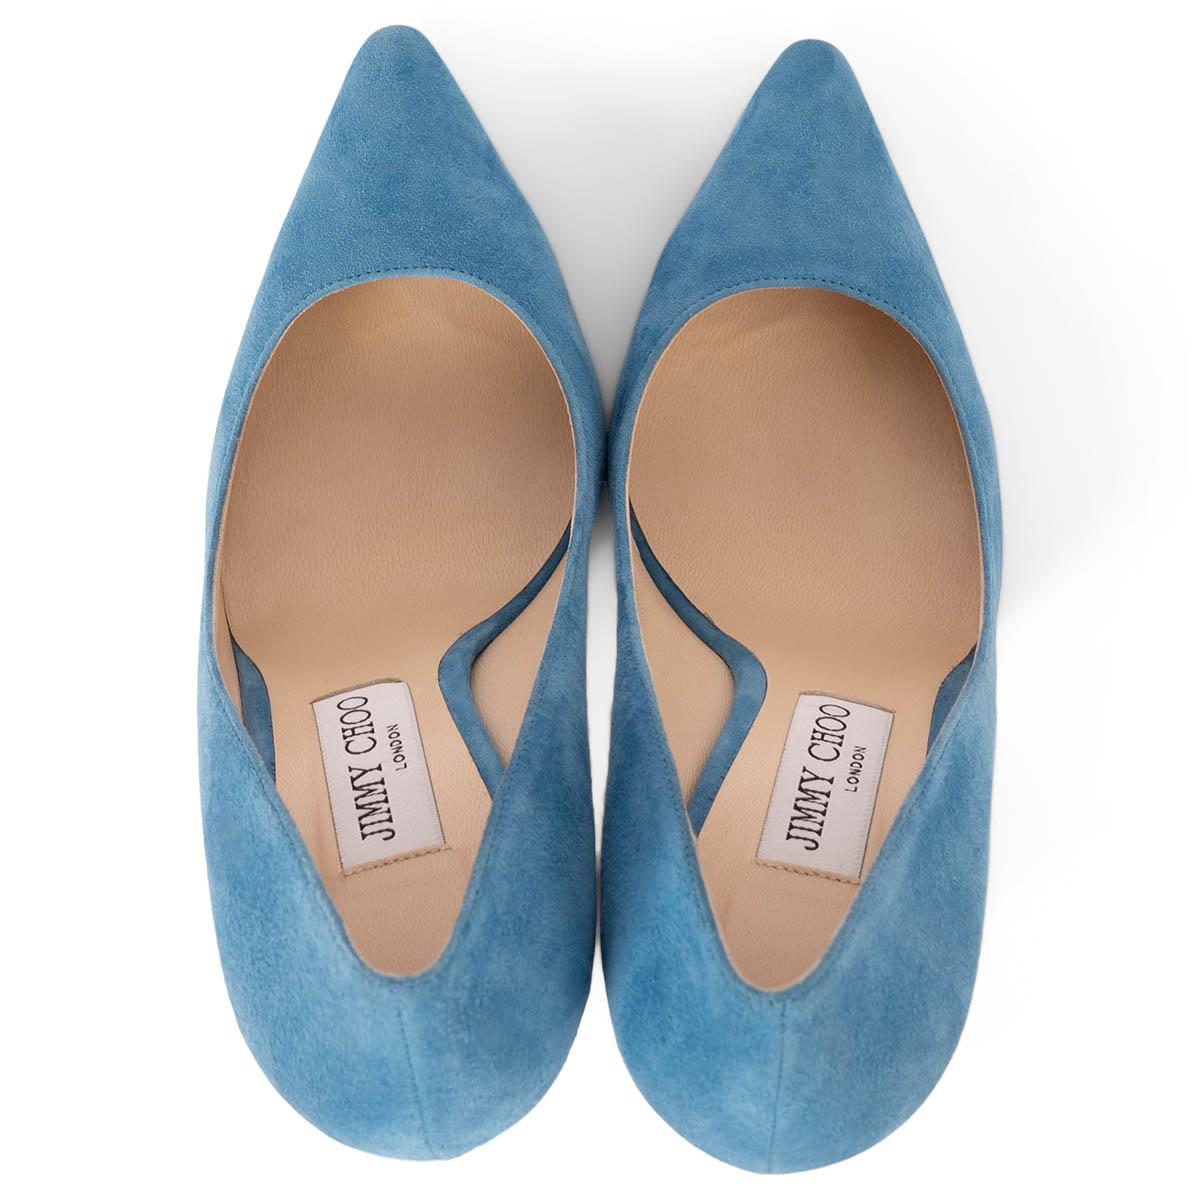 JIMMY CHOO Robot blue suede ROMY 100 Pumps Shoes 38.5 For Sale 2